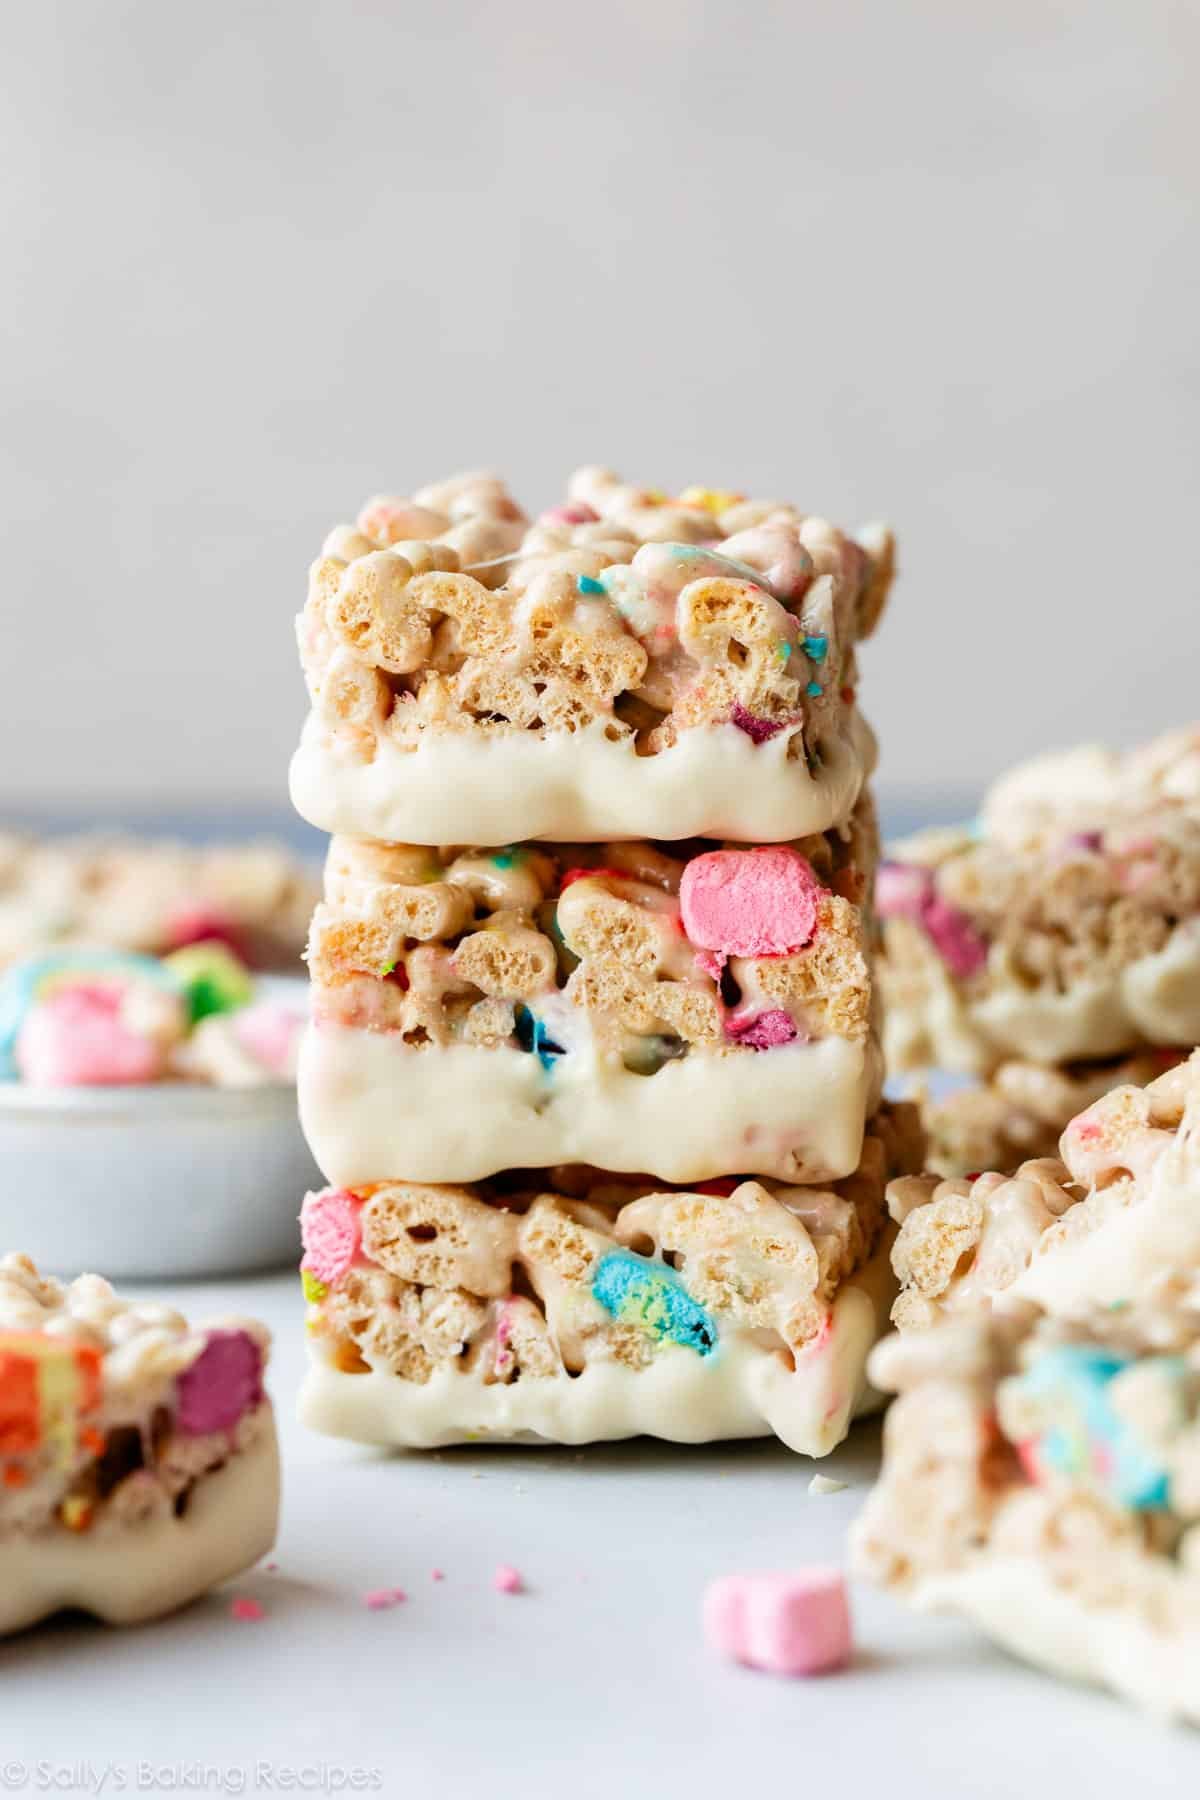 stack of 3 white chocolate dipped Lucky Charms cereal treats.